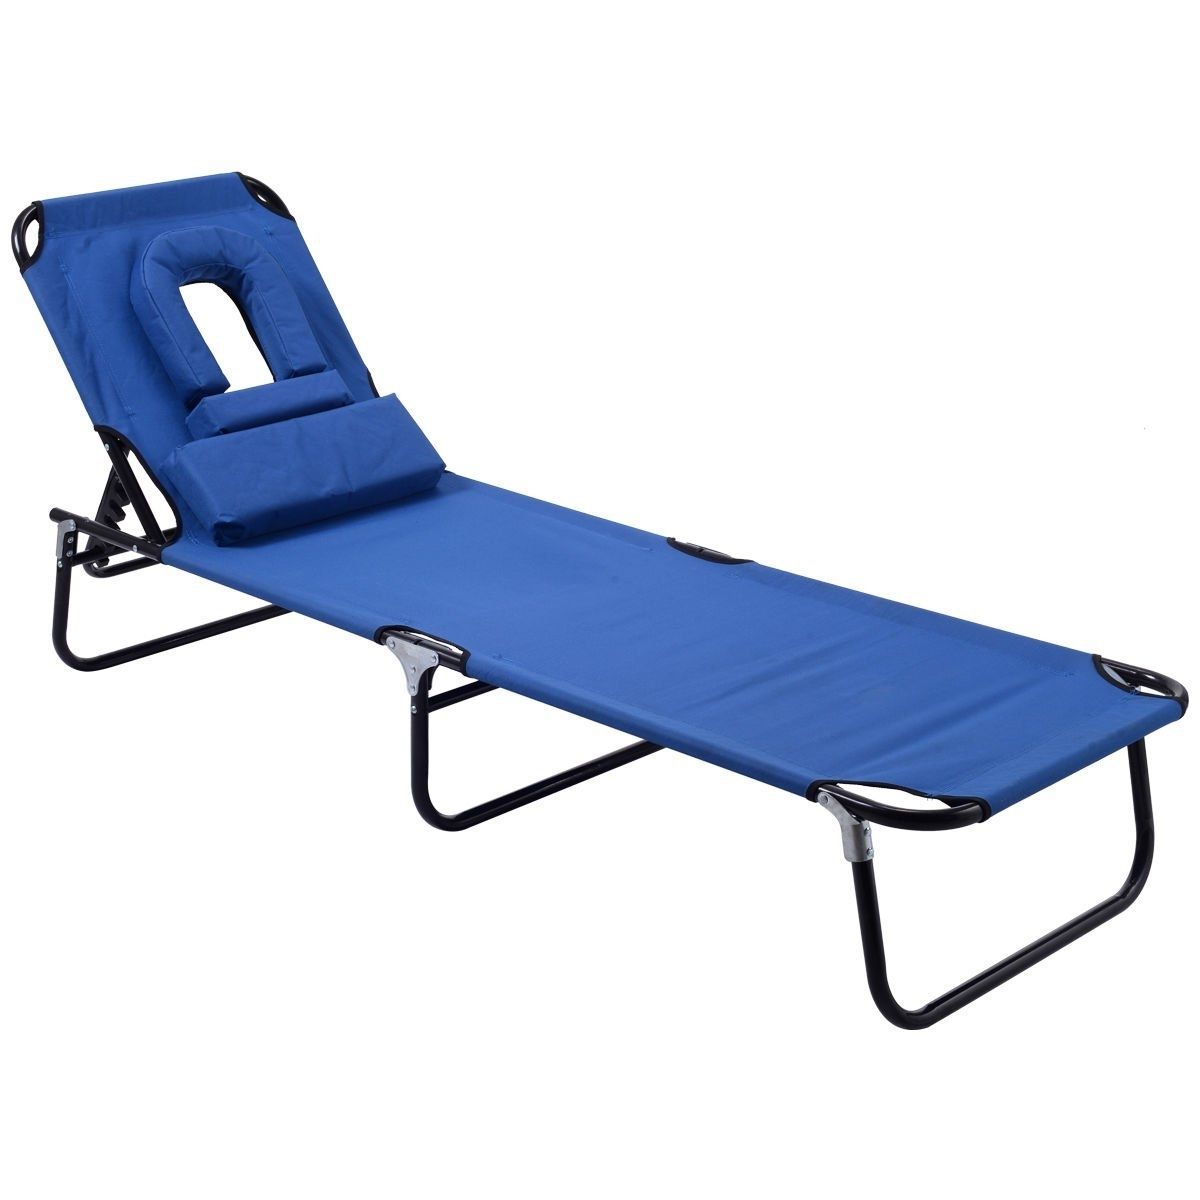 Folding Chaise Lounge Chairs For Outdoor In Trendy Amazon: Goplus Folding Chaise Lounge Chair Bed Outdoor Patio (View 10 of 15)